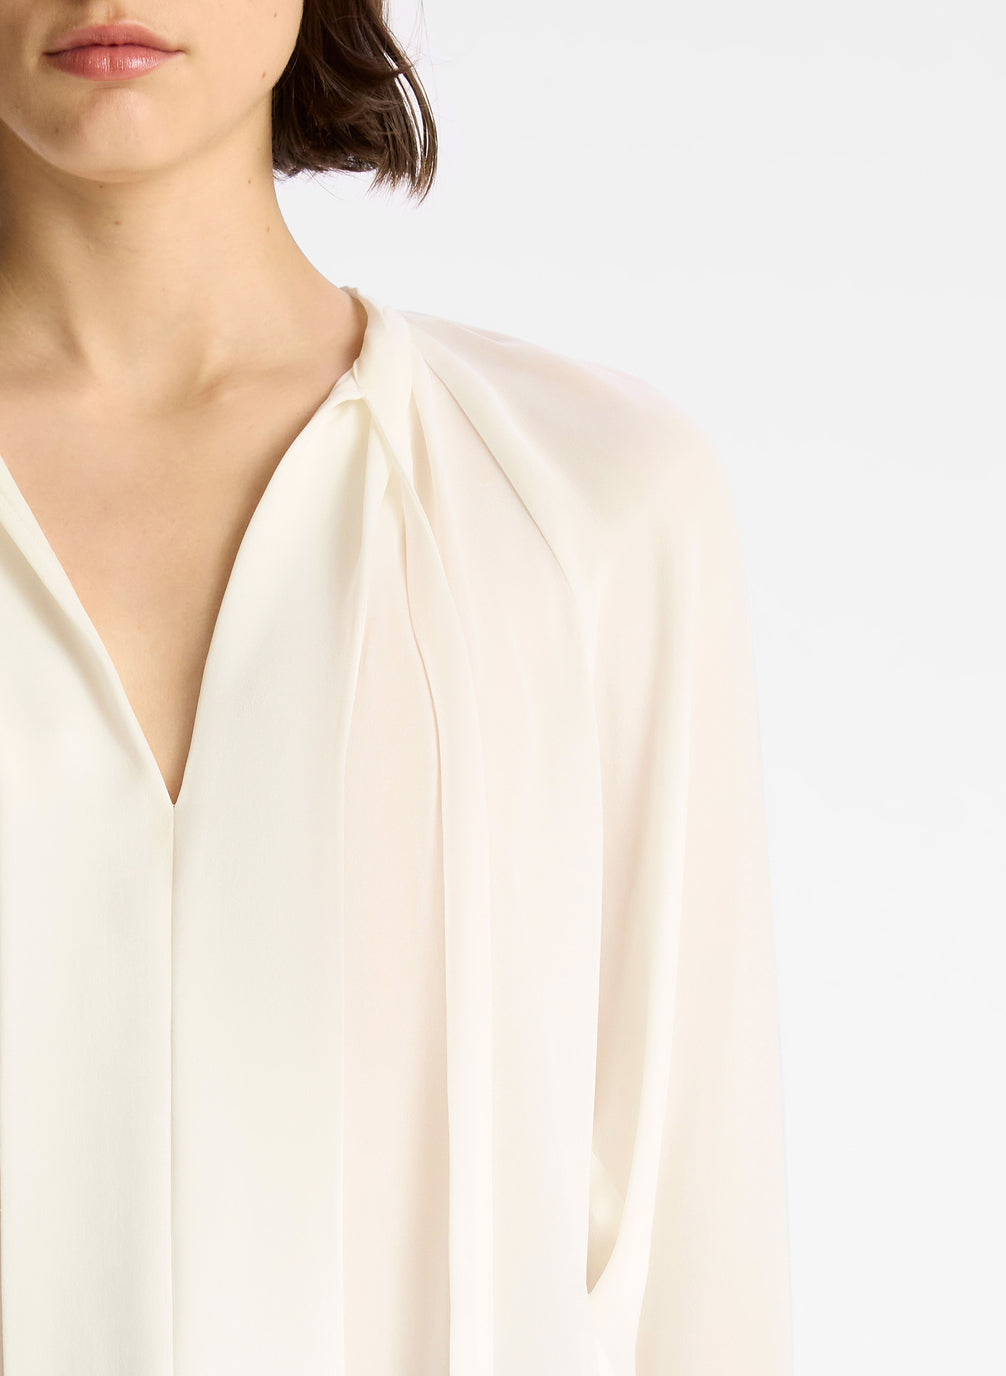 detail view of woman wearing cream long sleeve v neck blouse and navy blue pants